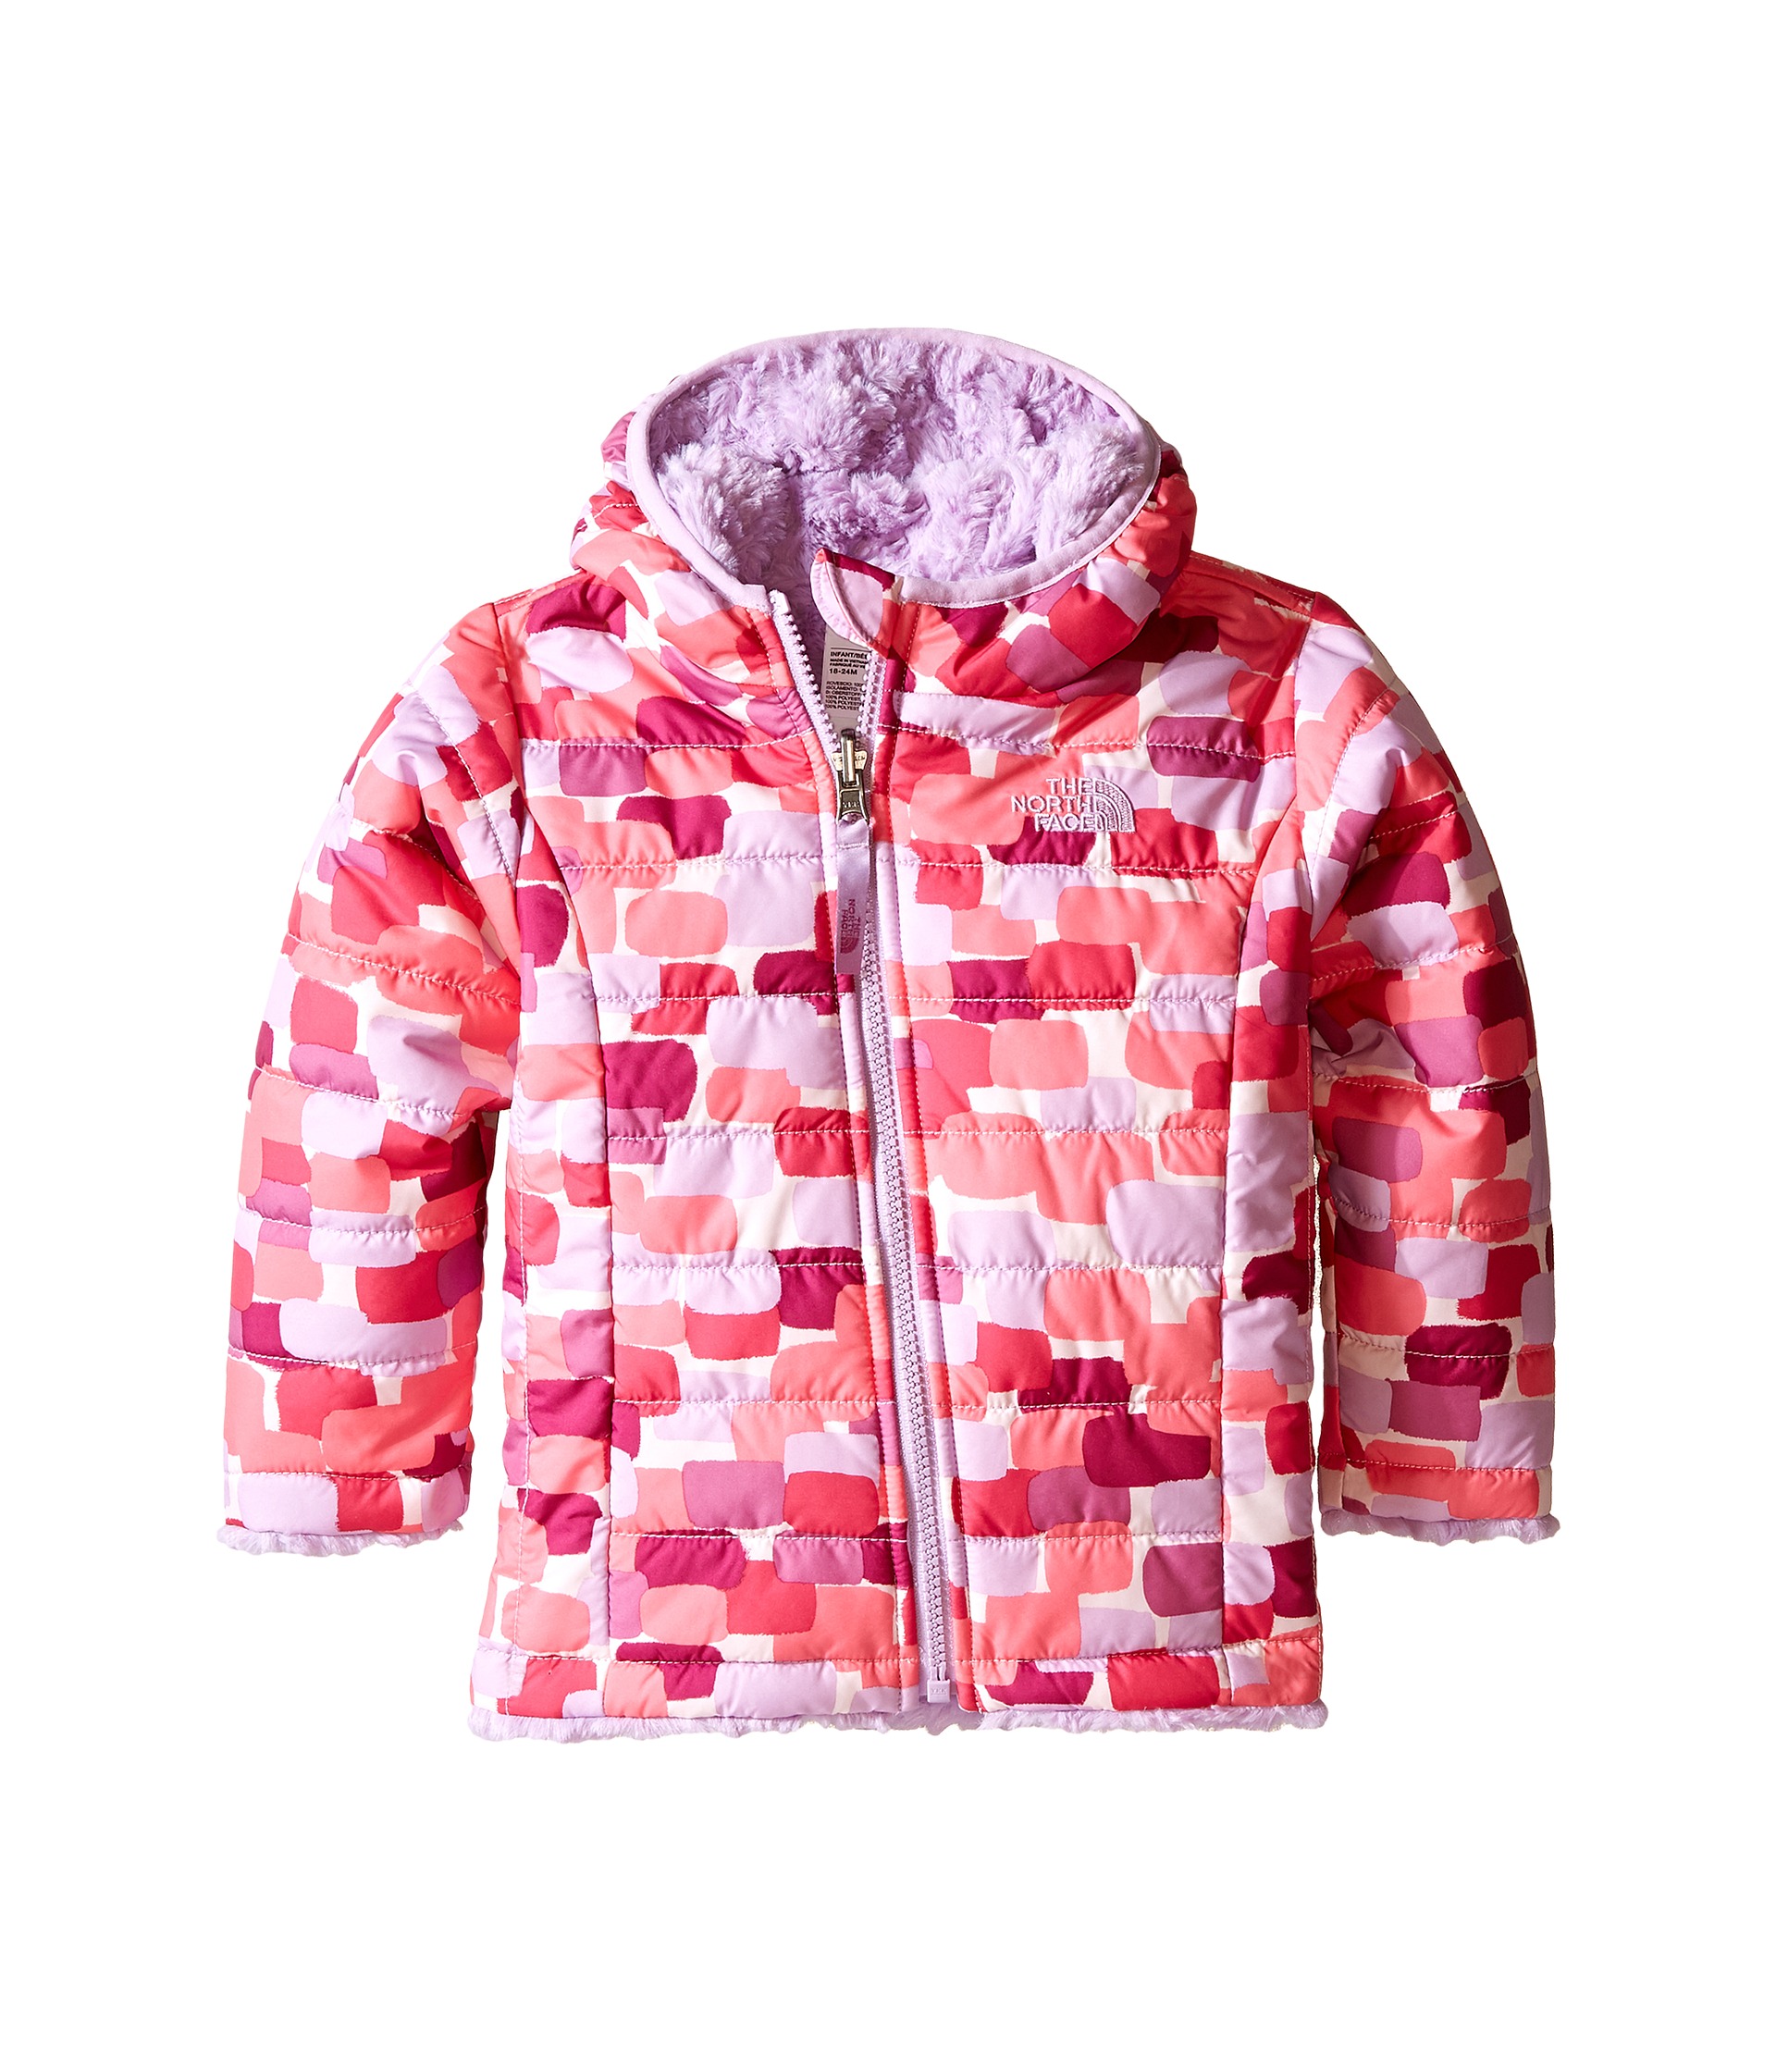 north face mossbud kids